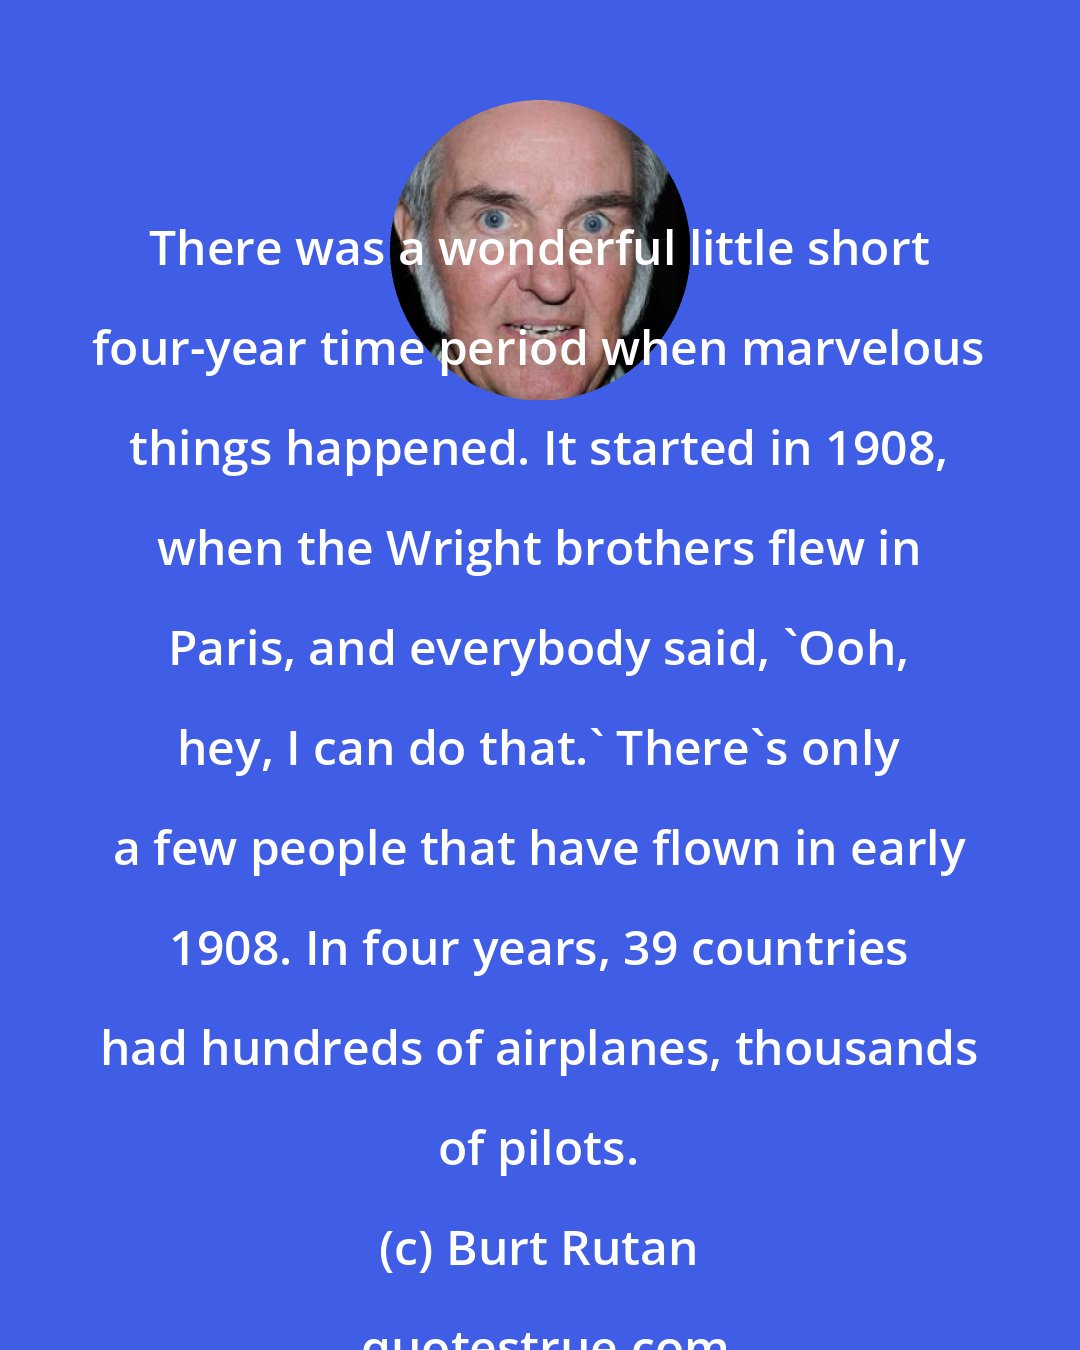 Burt Rutan: There was a wonderful little short four-year time period when marvelous things happened. It started in 1908, when the Wright brothers flew in Paris, and everybody said, 'Ooh, hey, I can do that.' There's only a few people that have flown in early 1908. In four years, 39 countries had hundreds of airplanes, thousands of pilots.